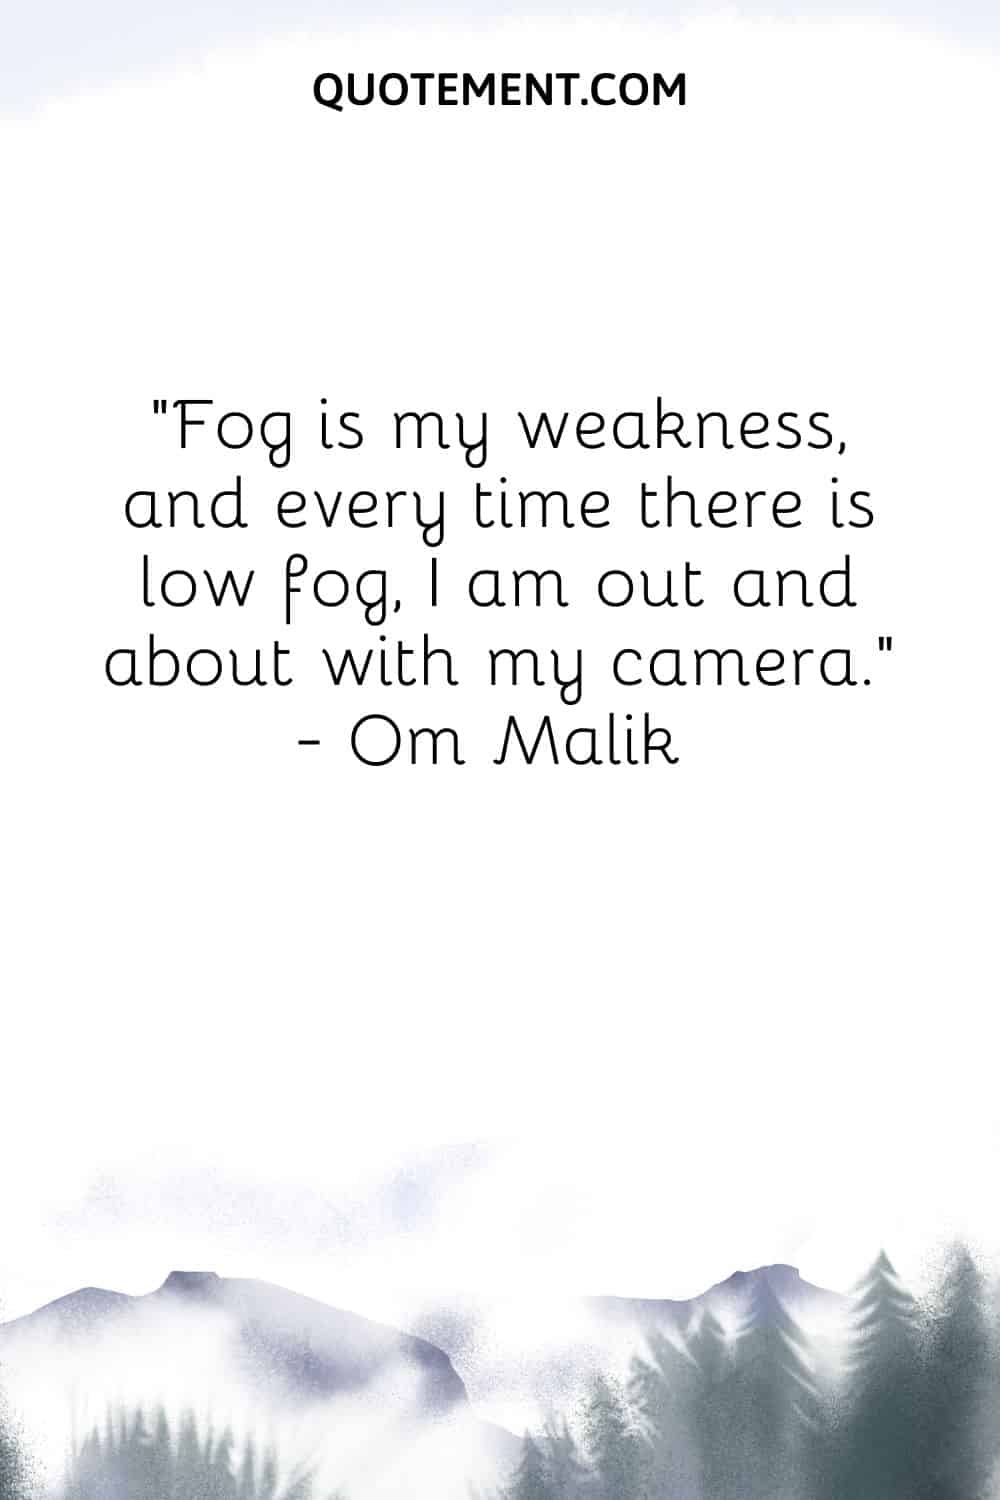 Fog is my weakness, and every time there is low fog